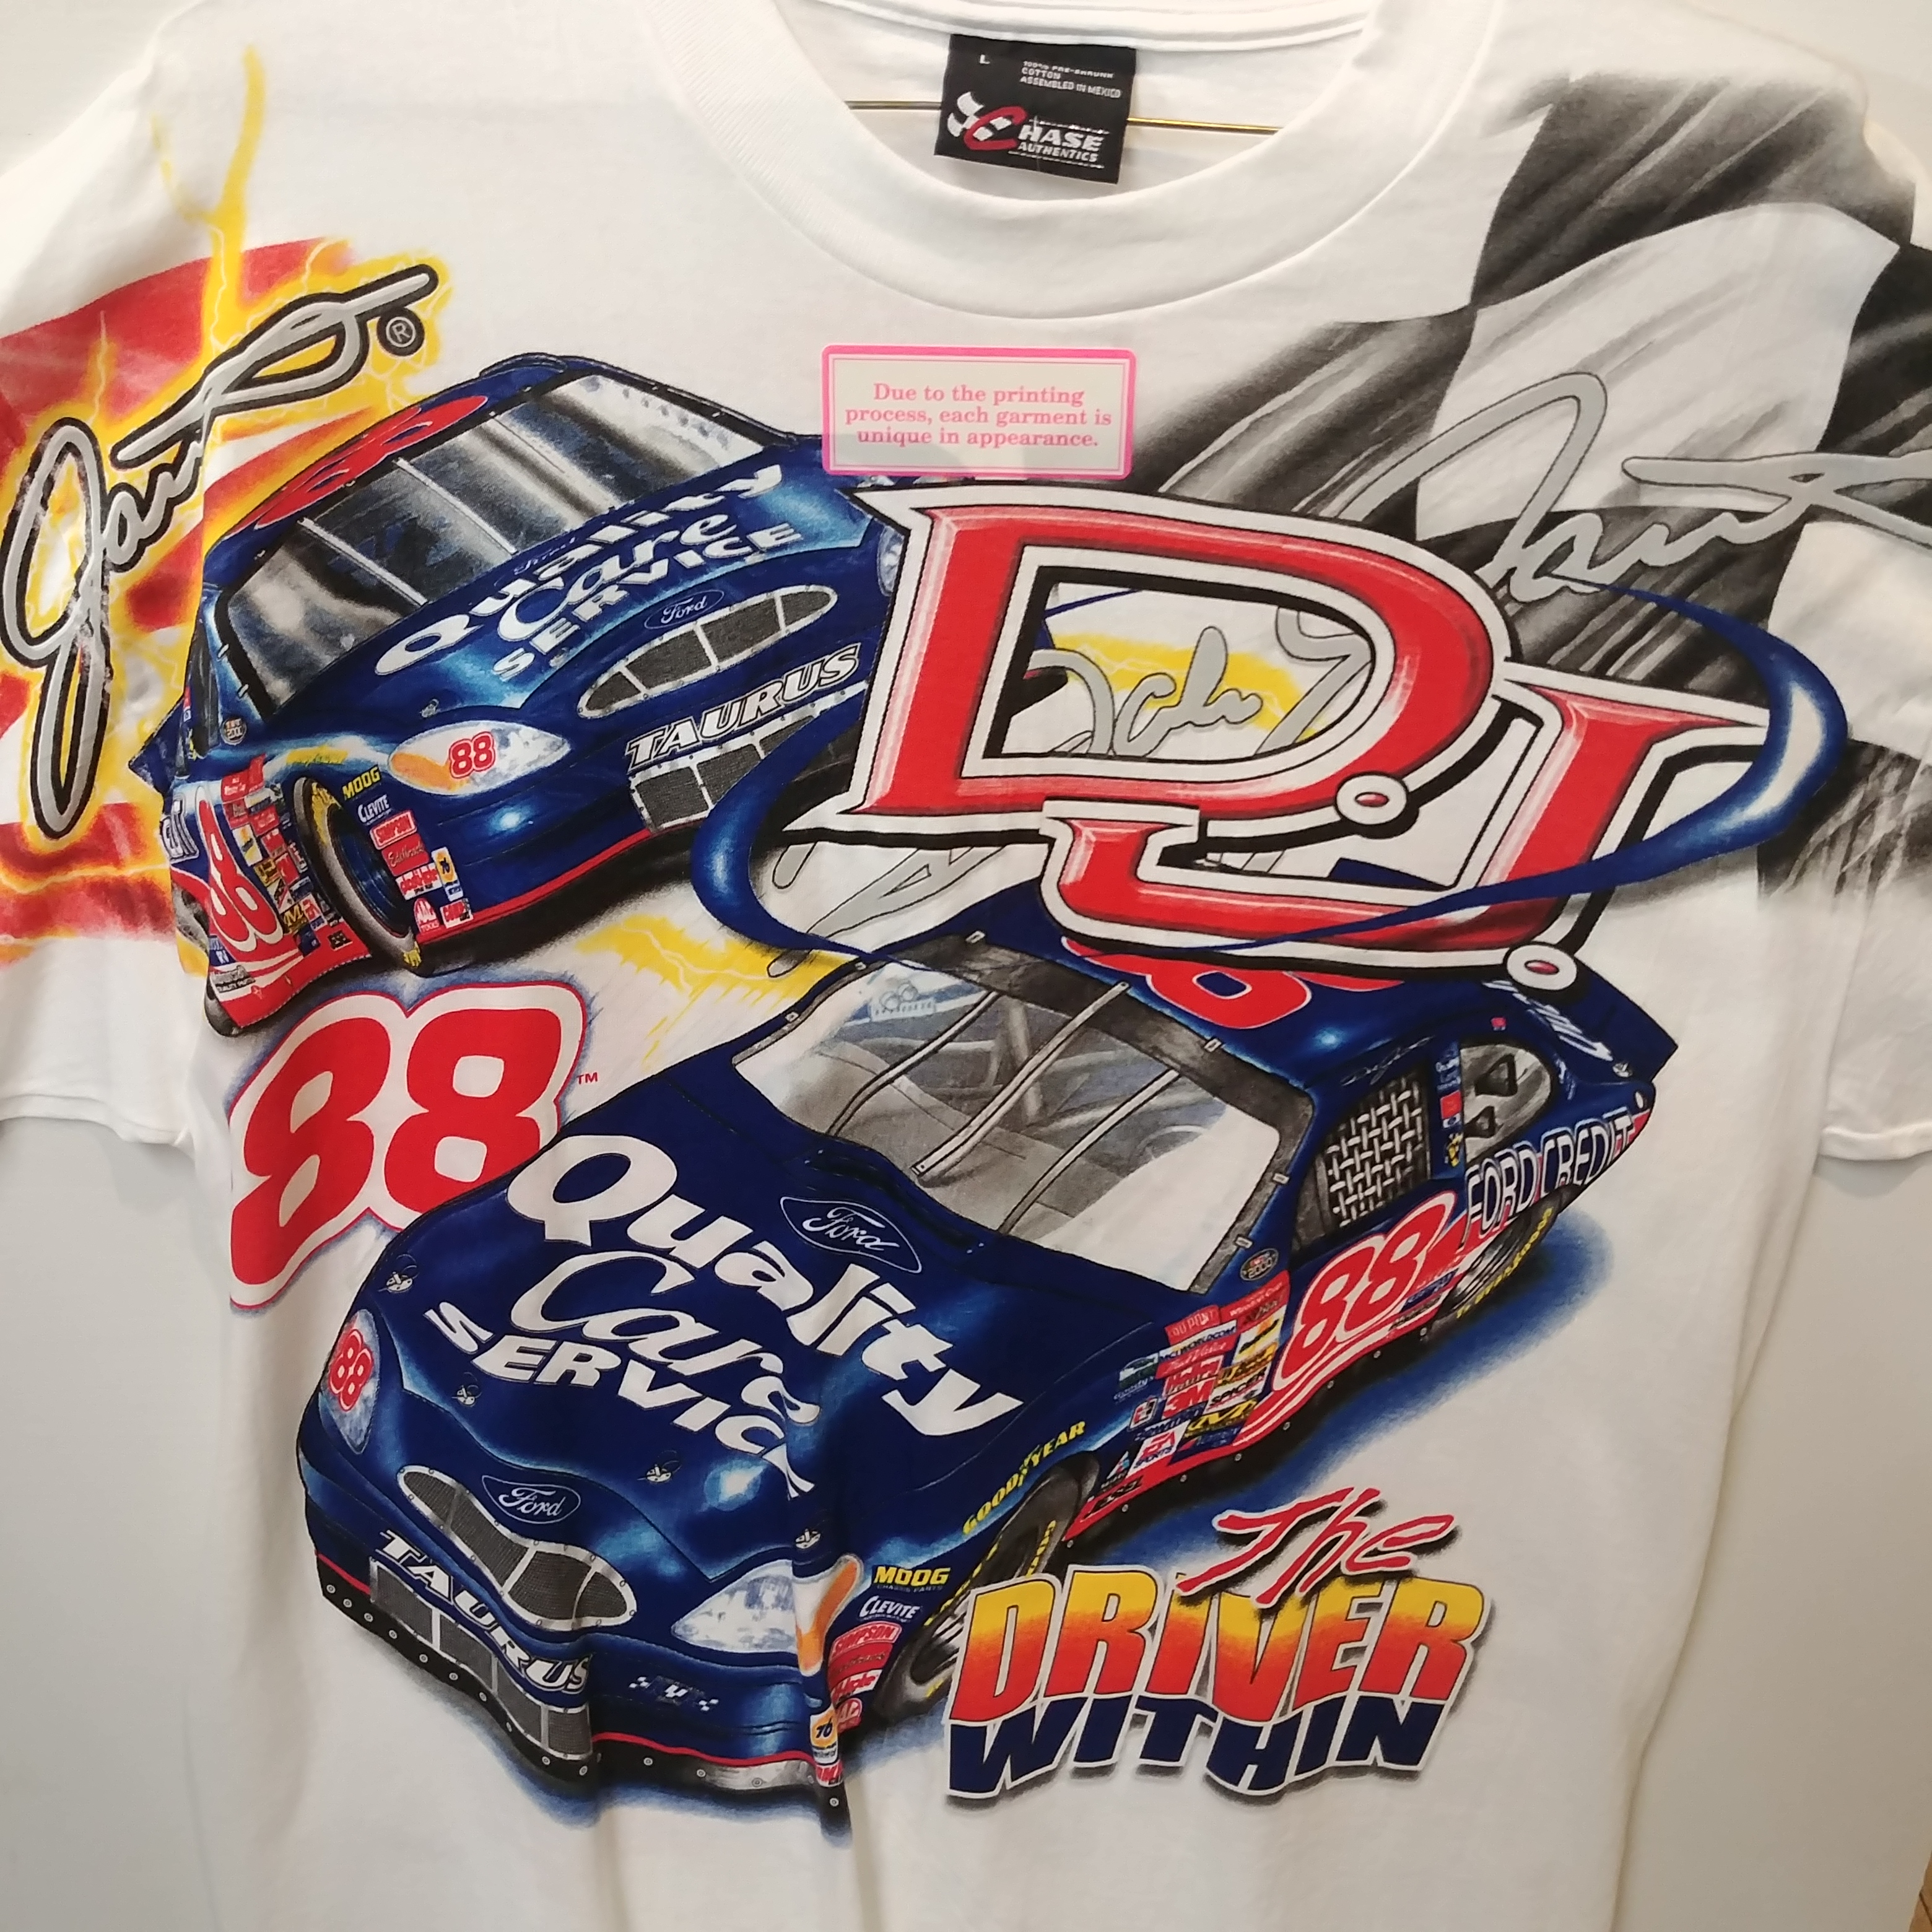 2000 Dale Jarrett Quality Care "Power To Win" Total Print tee